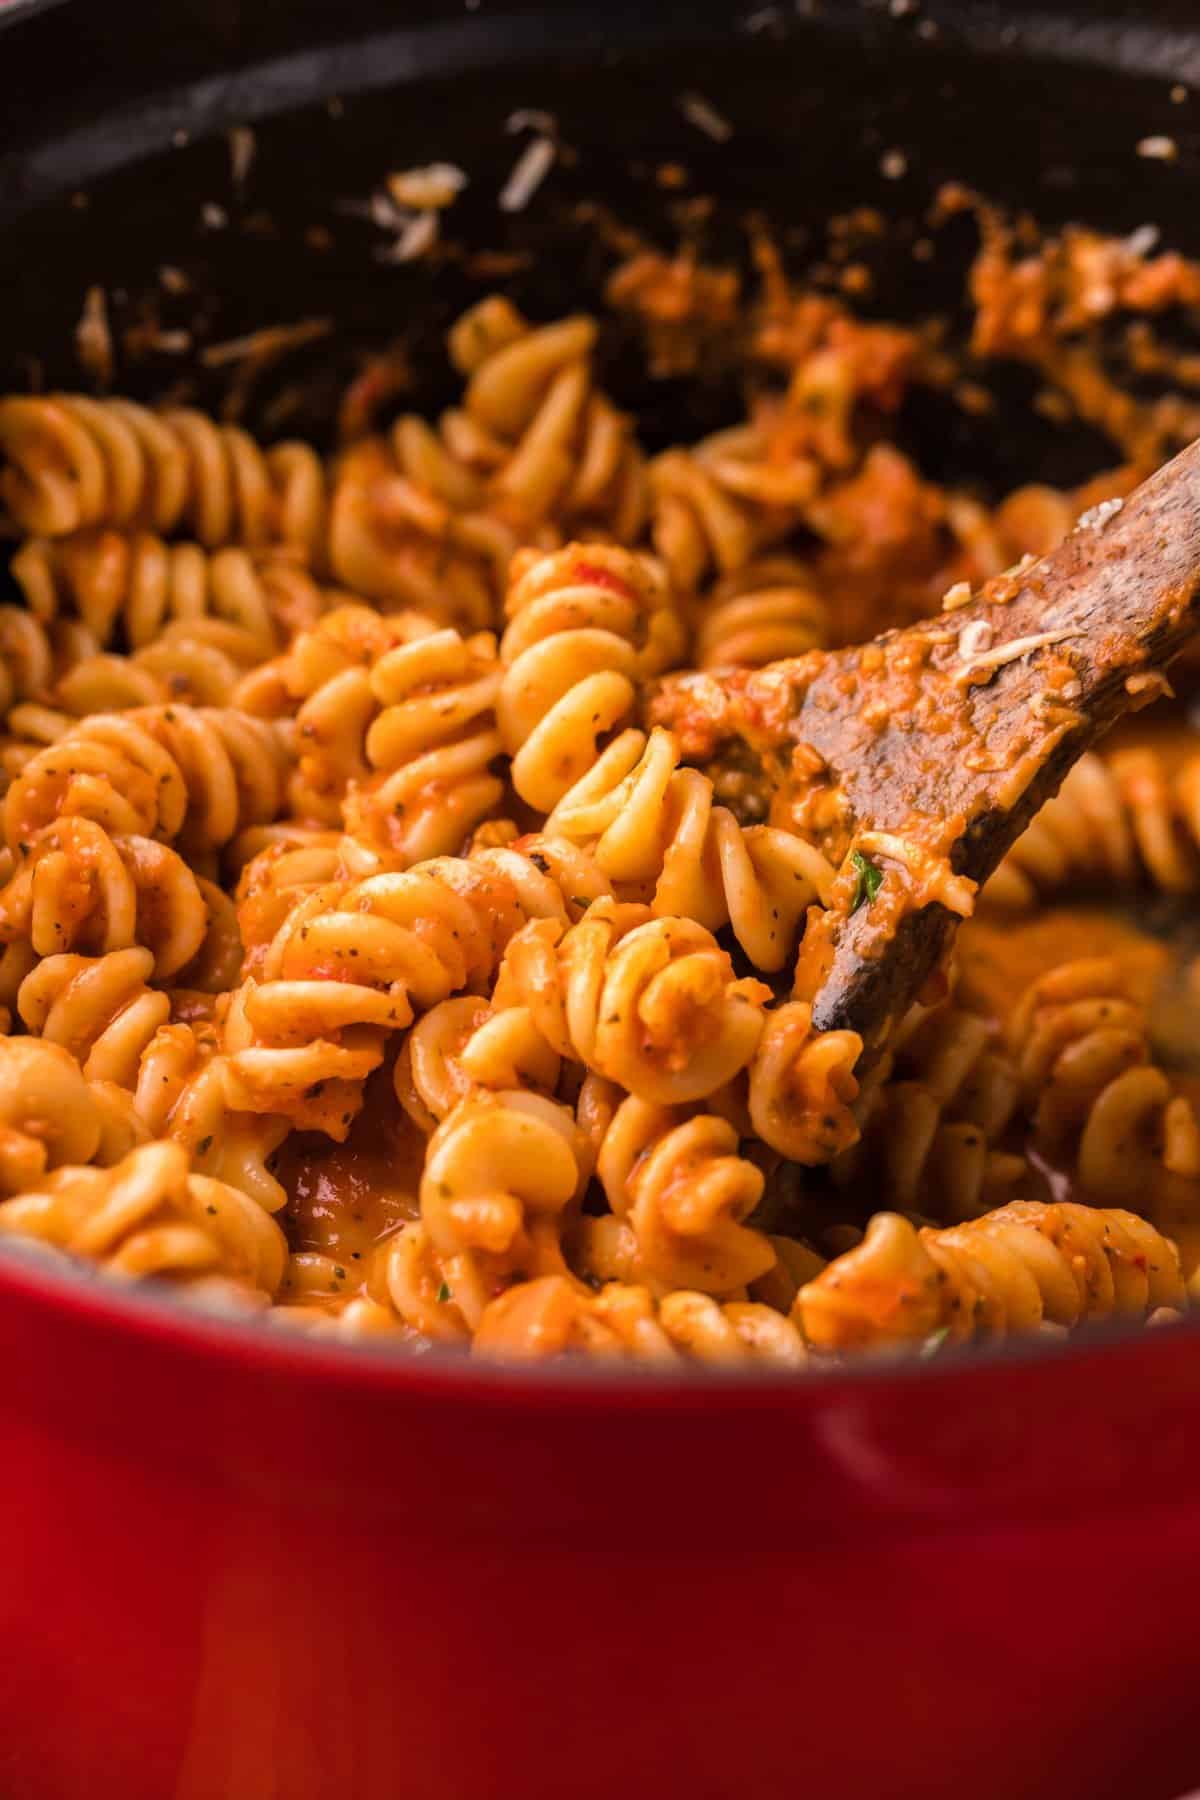 Red pot with spicy fusilli pasta and a wooden spoon taking a portion.